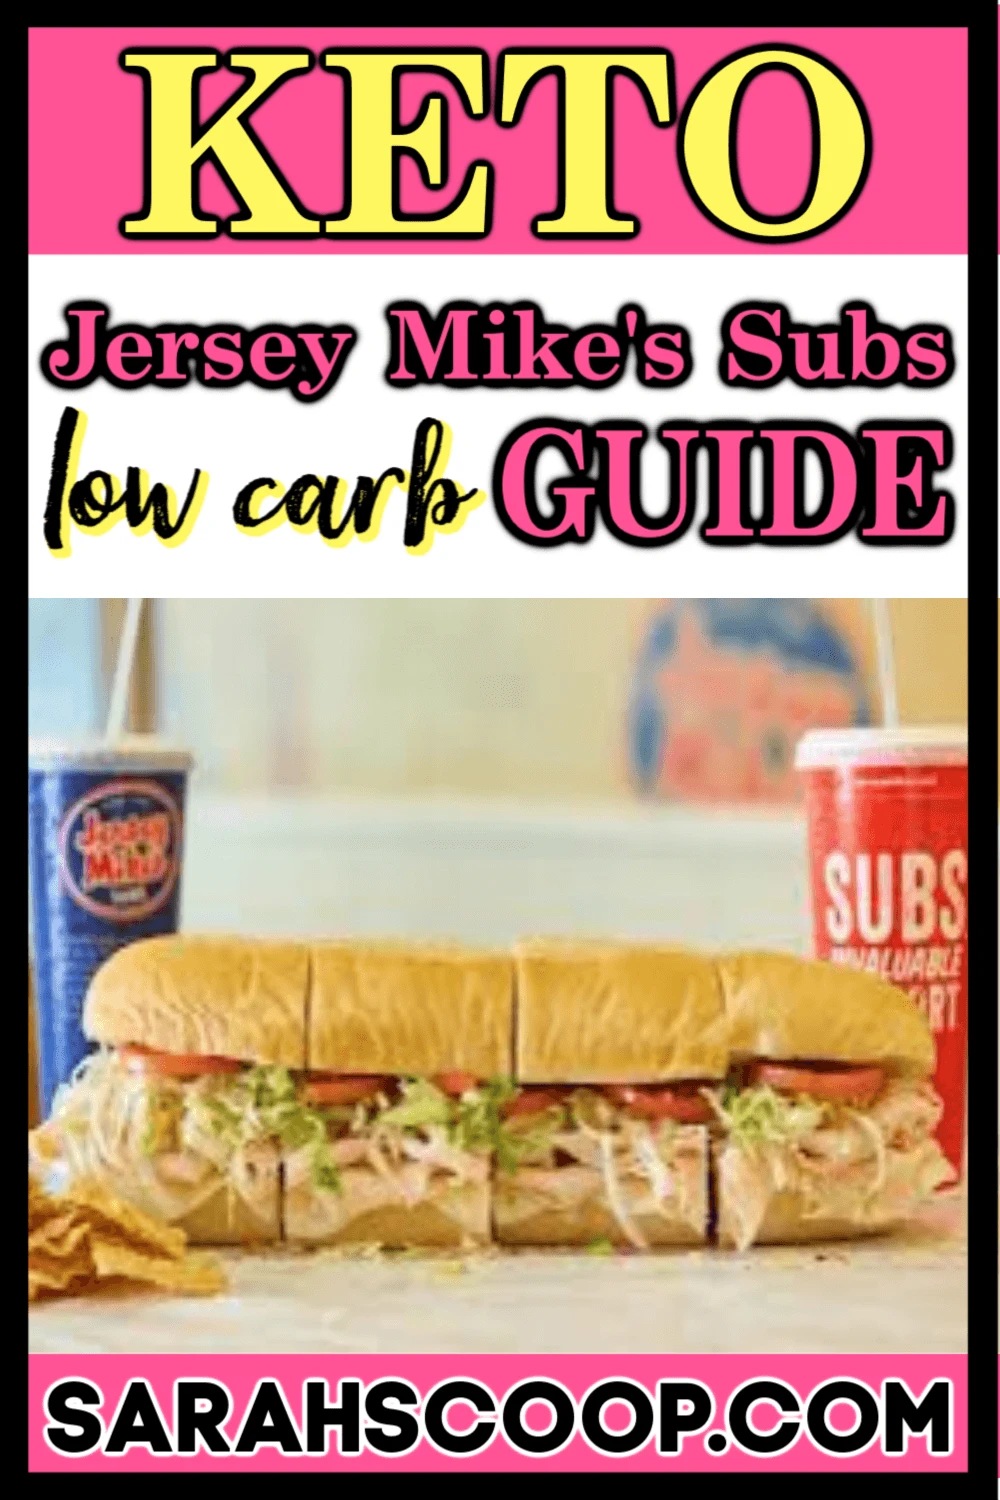 keto at jersey mike's